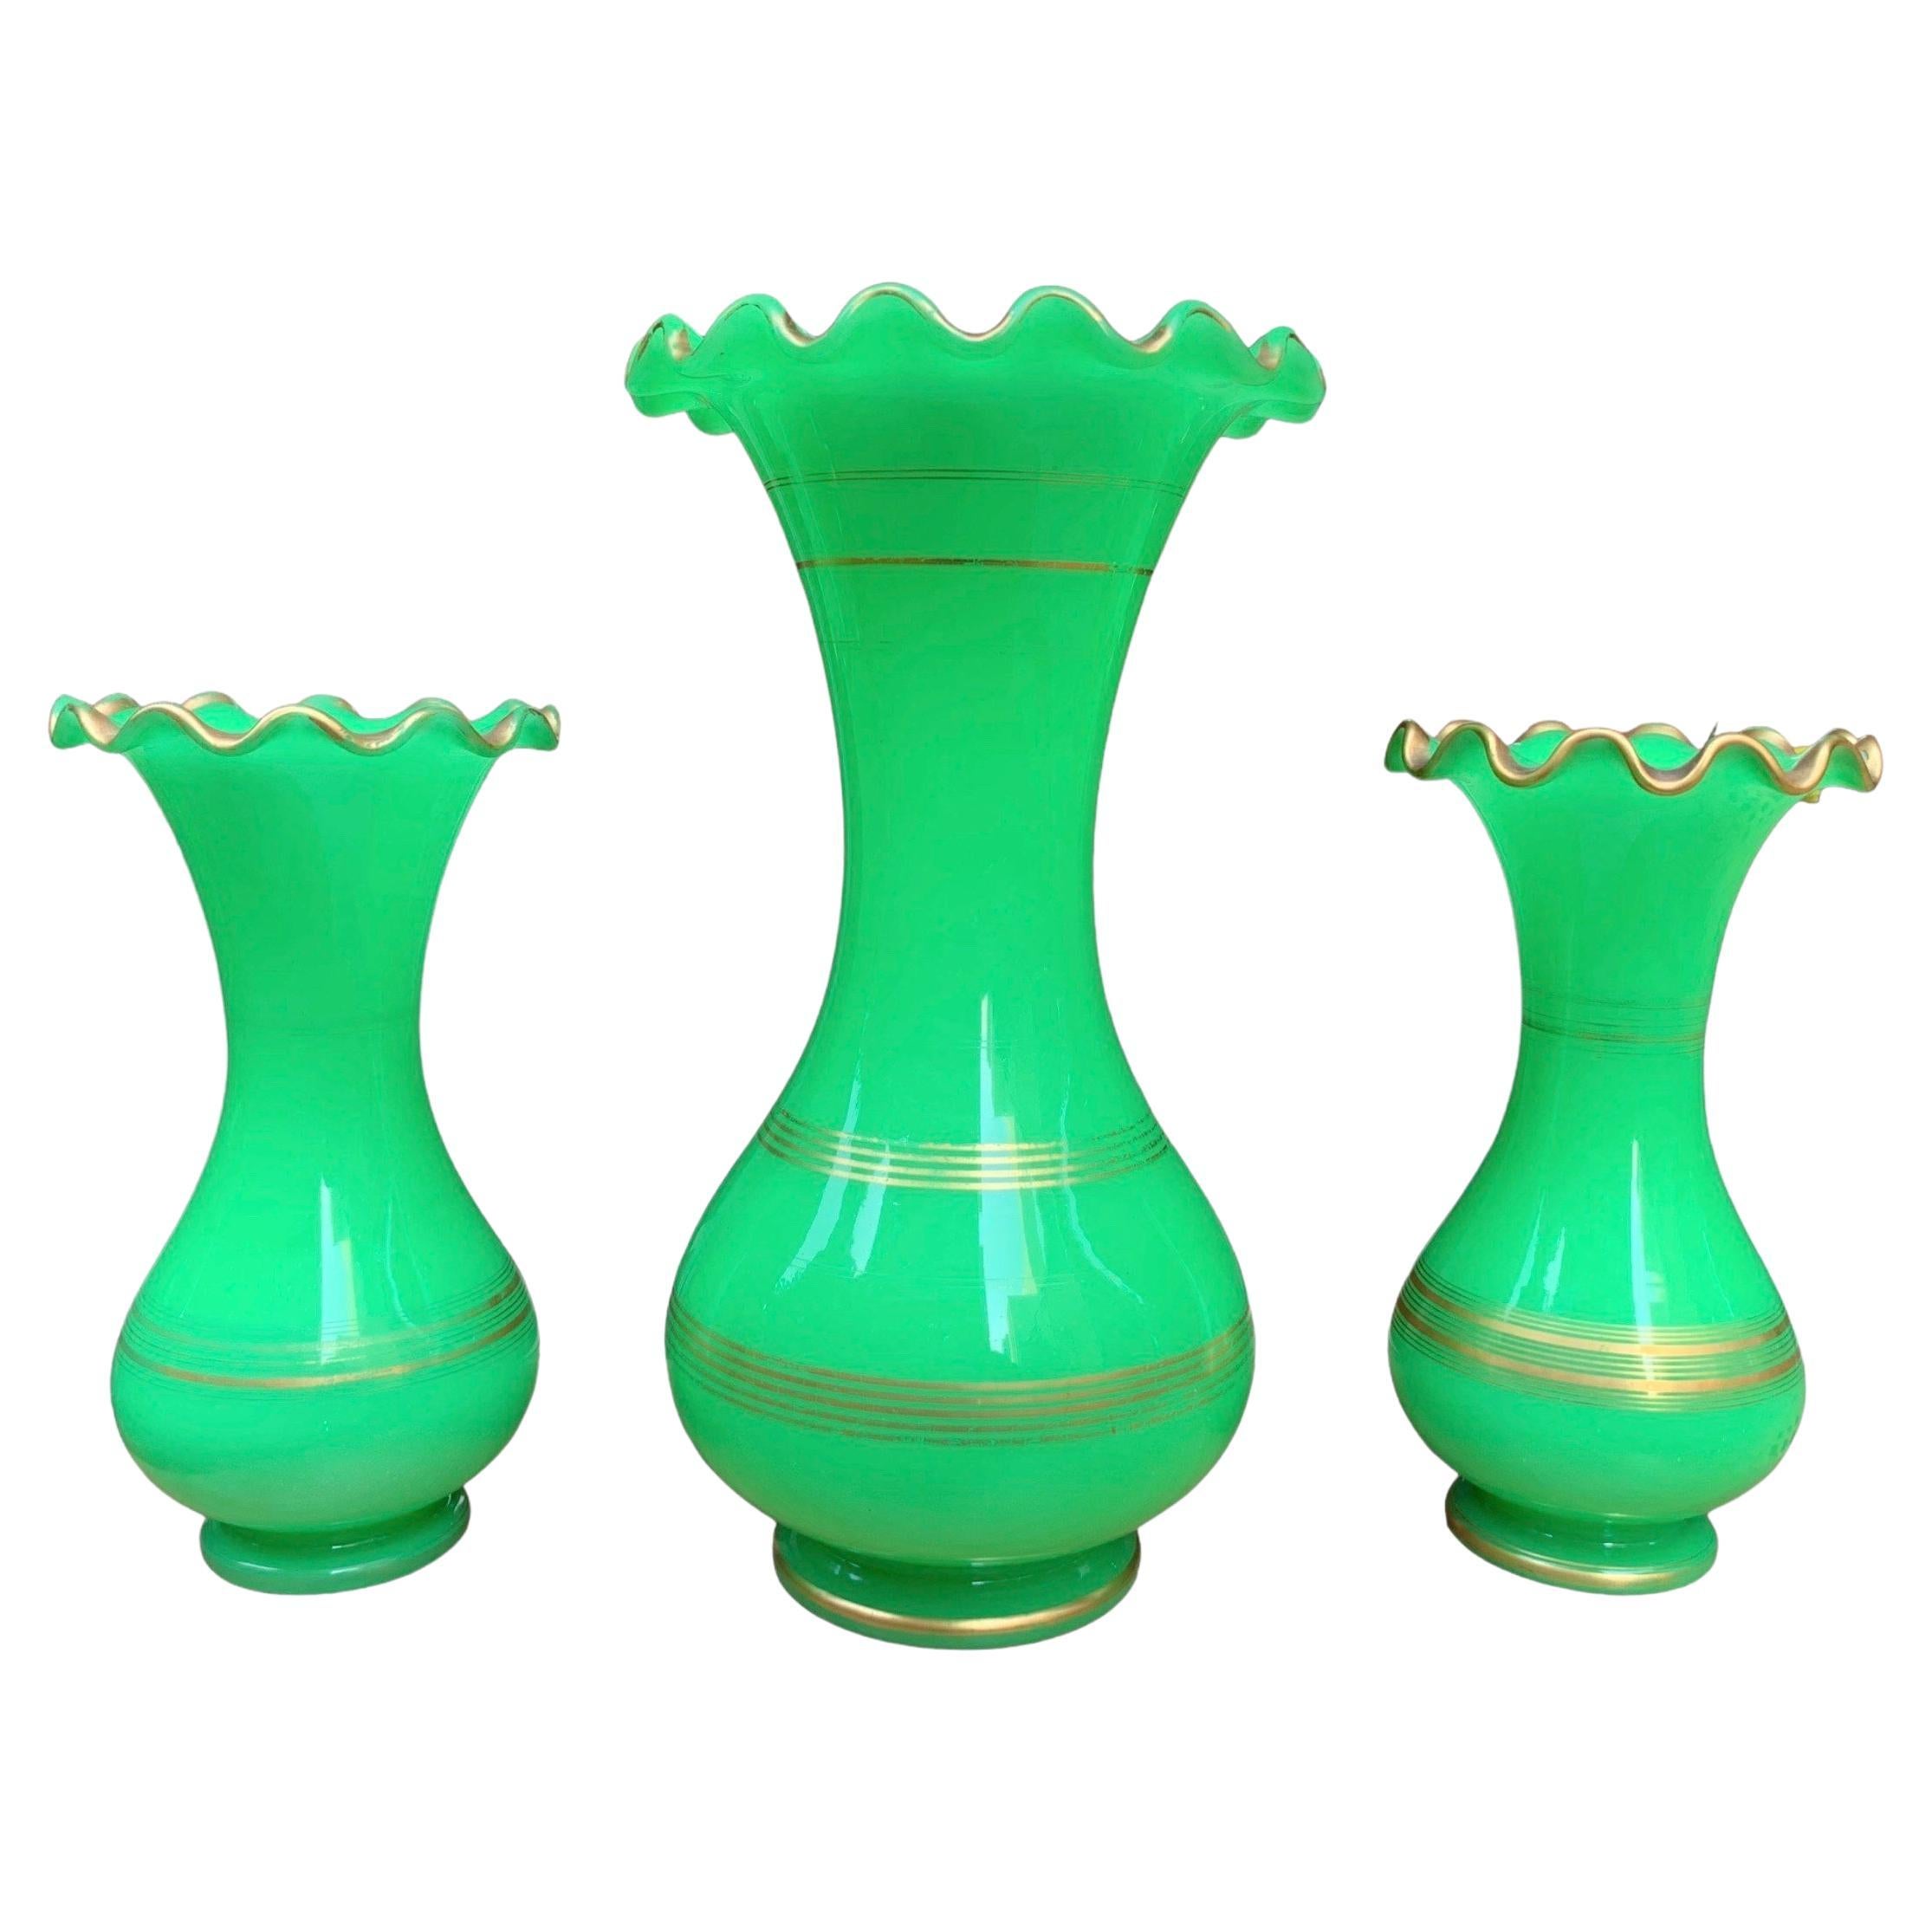 Antique 3 French Vases Jn Green Uranium Opaline Glass, 19th Century For Sale